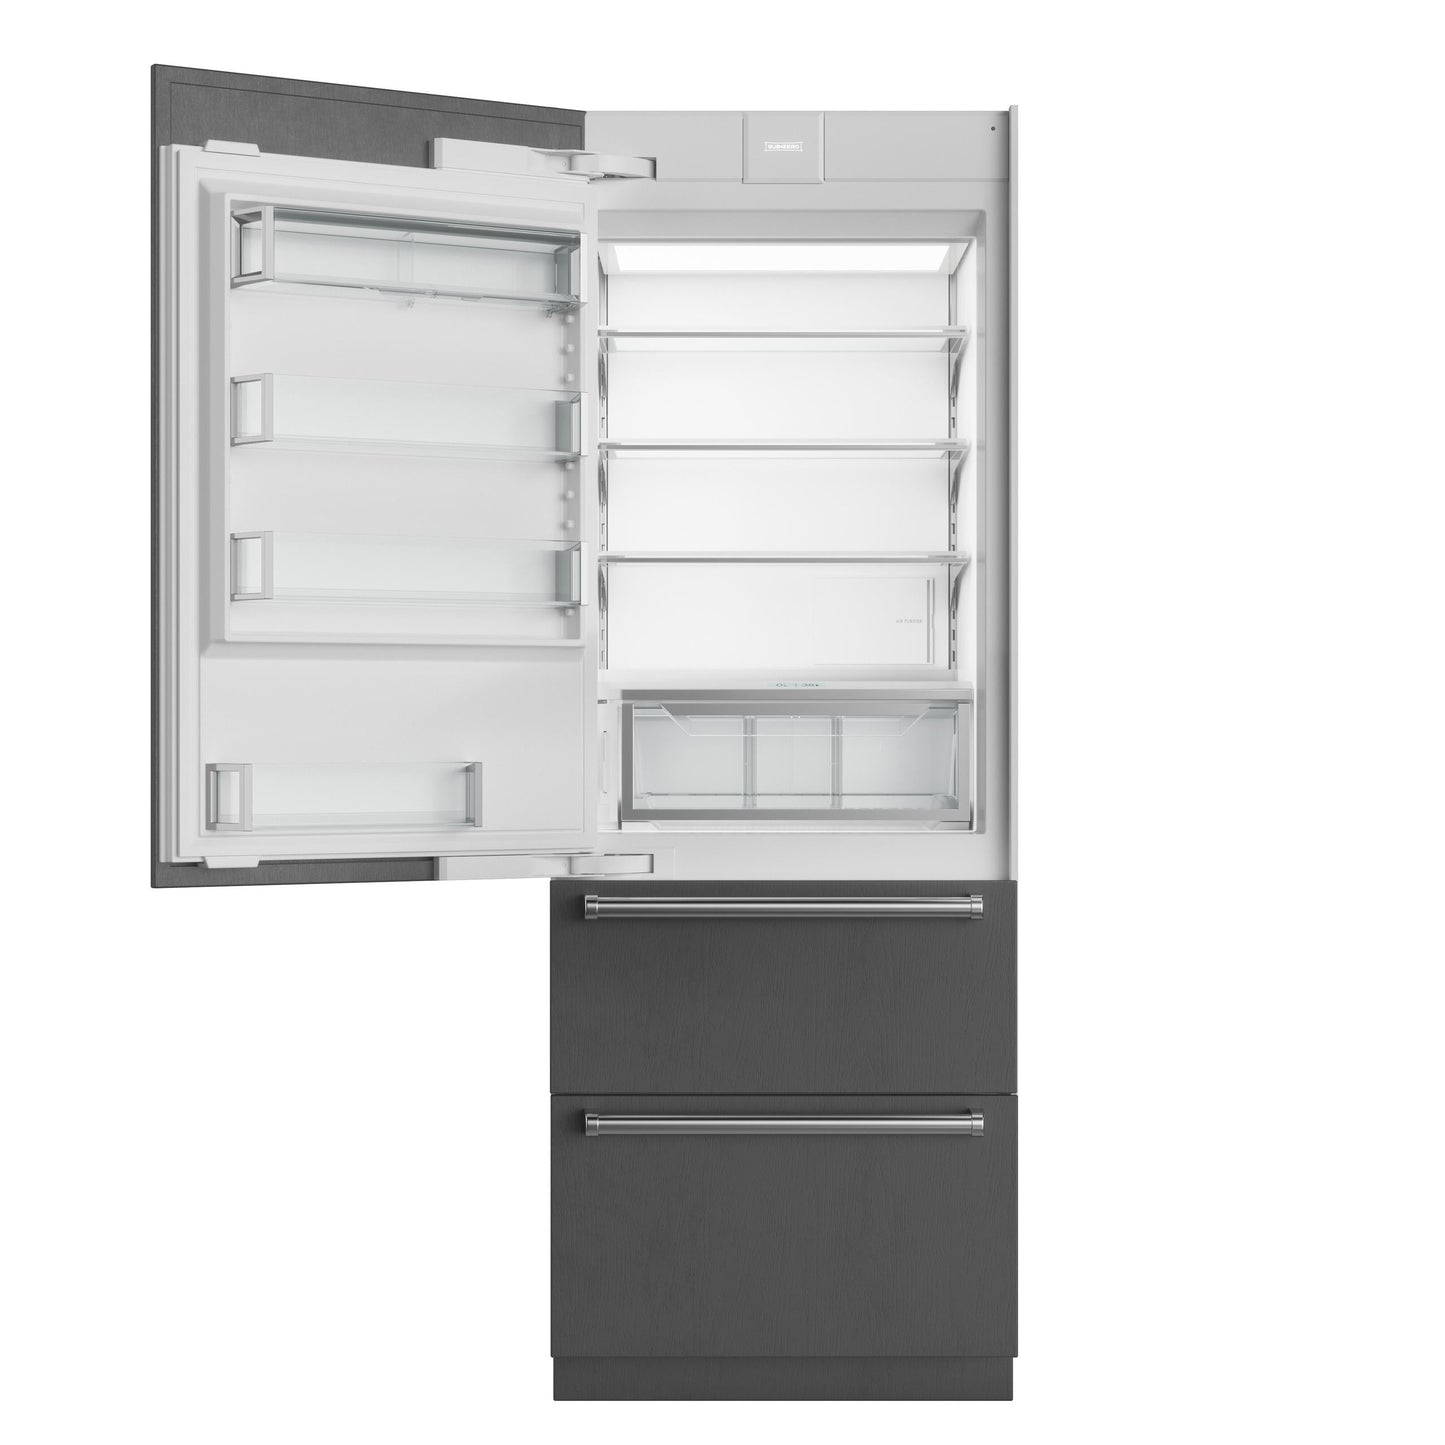 Sub-Zero DET3050FIR 30" Designer Over-And-Under Freezer With Ice Maker - Panel Ready